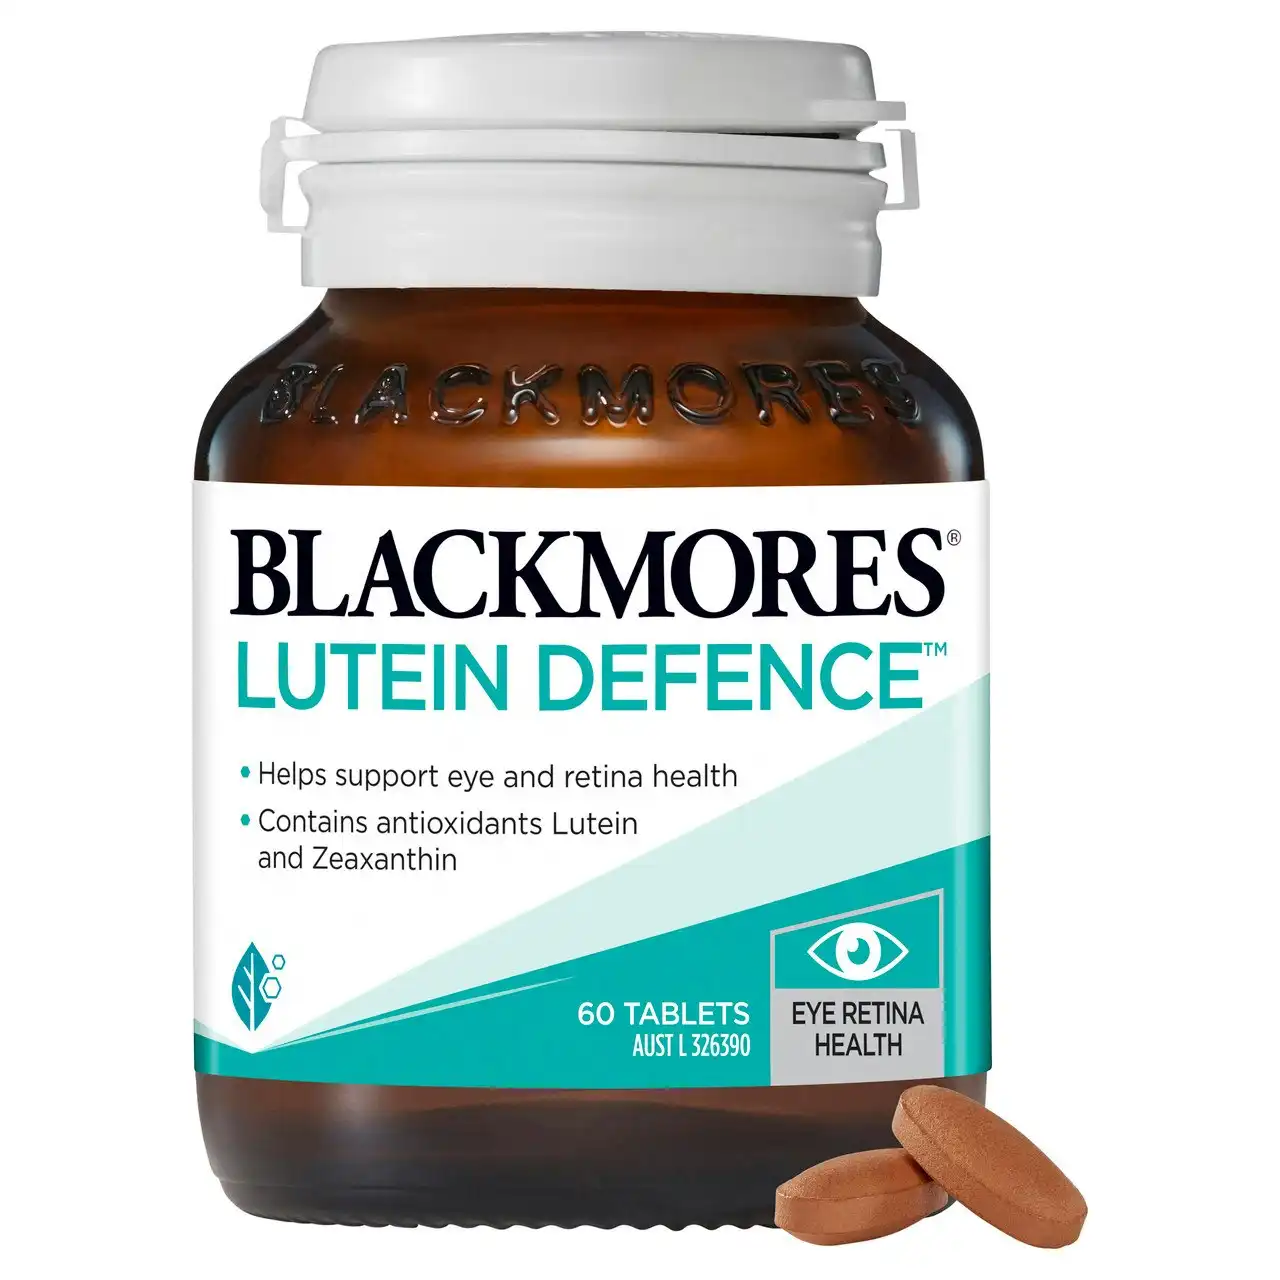 Blackmores(R) LUTEIN DEFENCE(TM) 60 Tablets